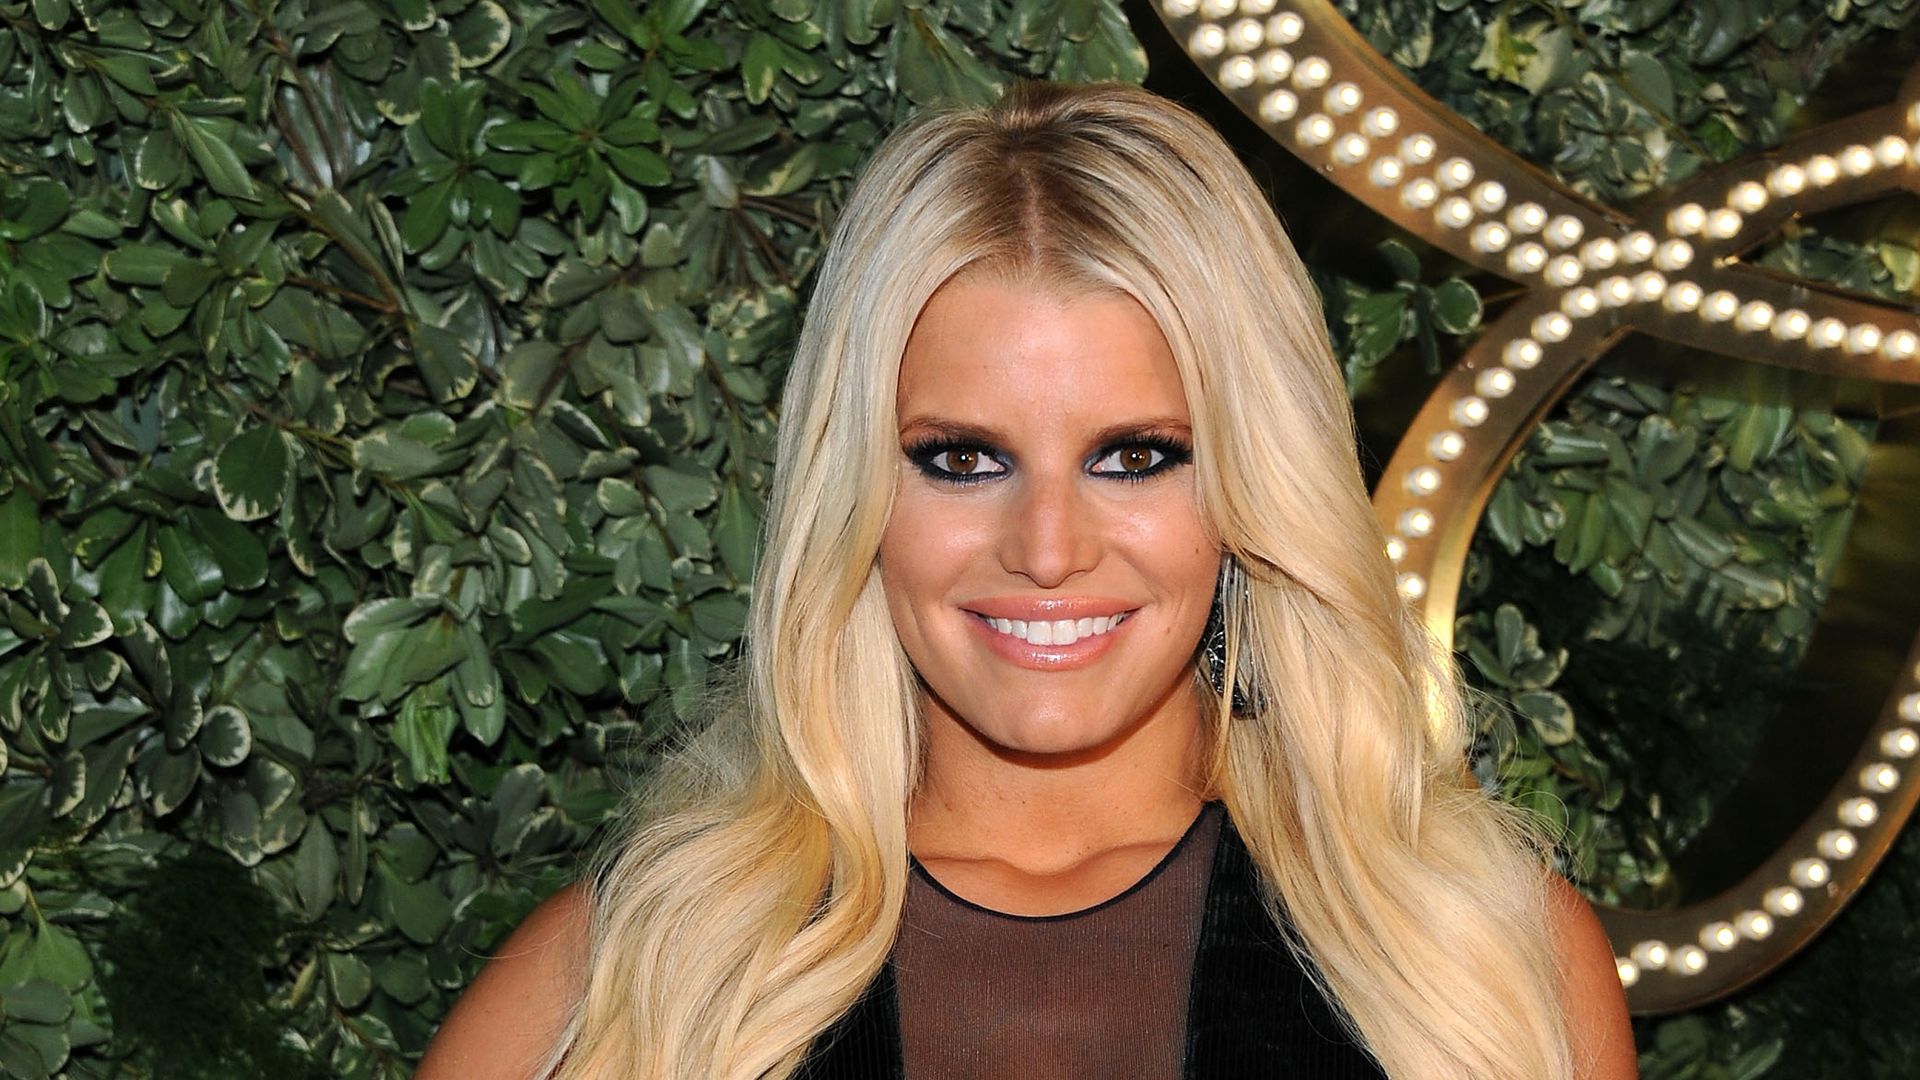 Jessica Simpson attends the Jessica Simpson Collection Presentation Spring 2016 during New York Fashion Week on September 9, 2015 in New York City.